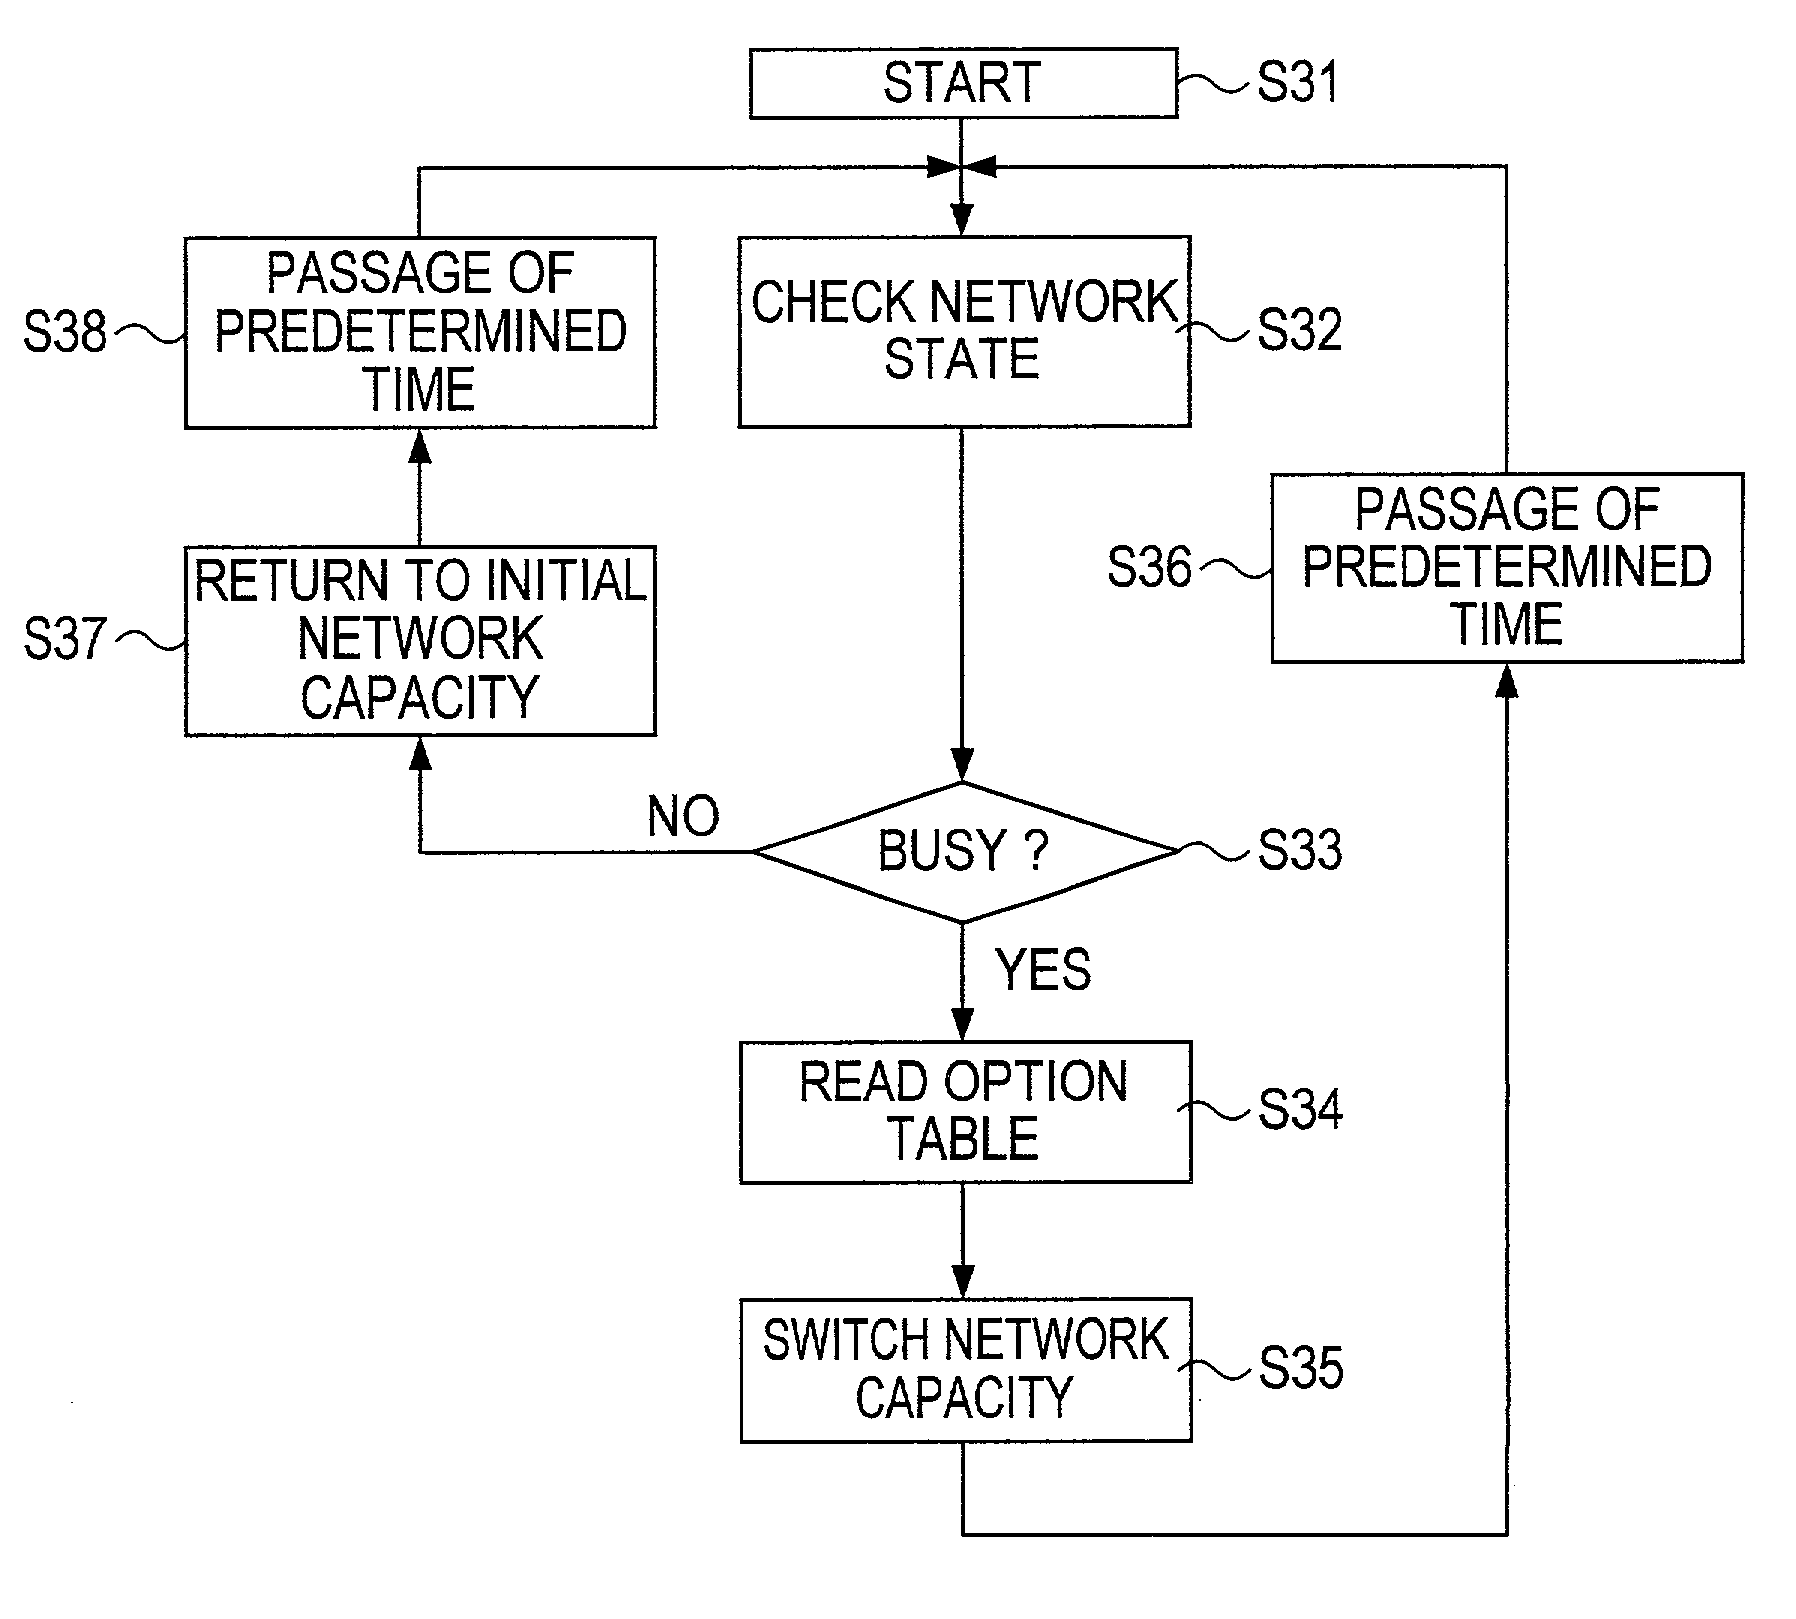 Method for charging fee for use of network resources and method and system for allotting network resources